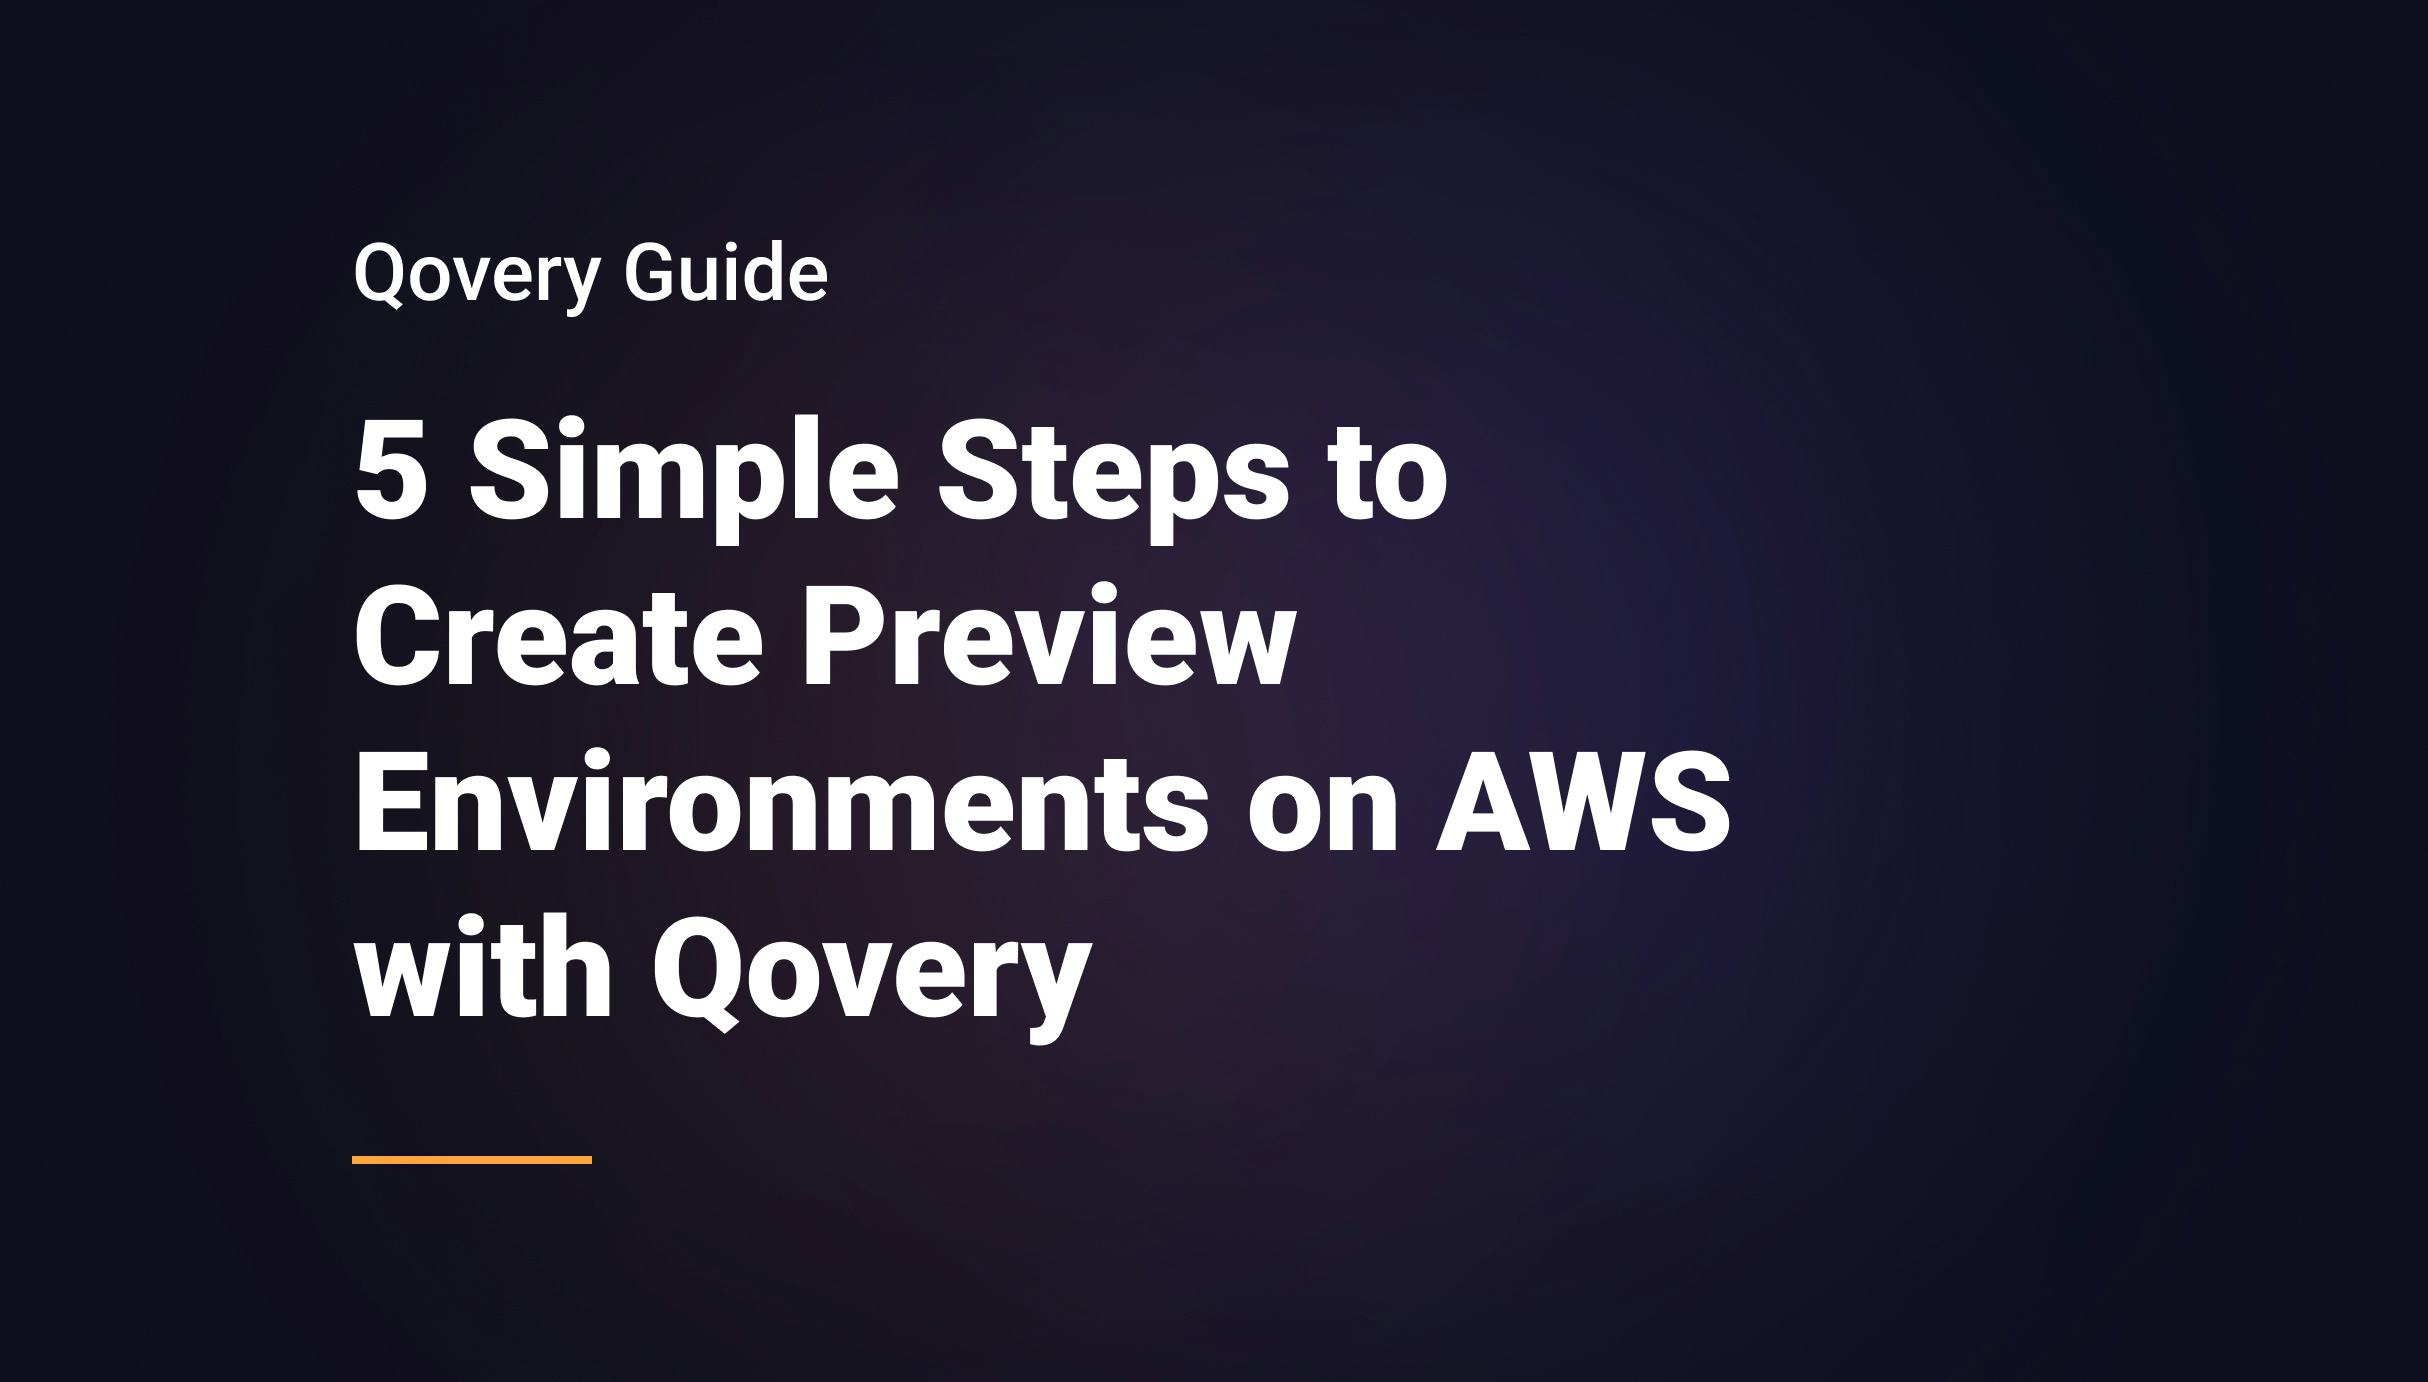 5 Simple Steps to Create Preview Environments on AWS with Qovery